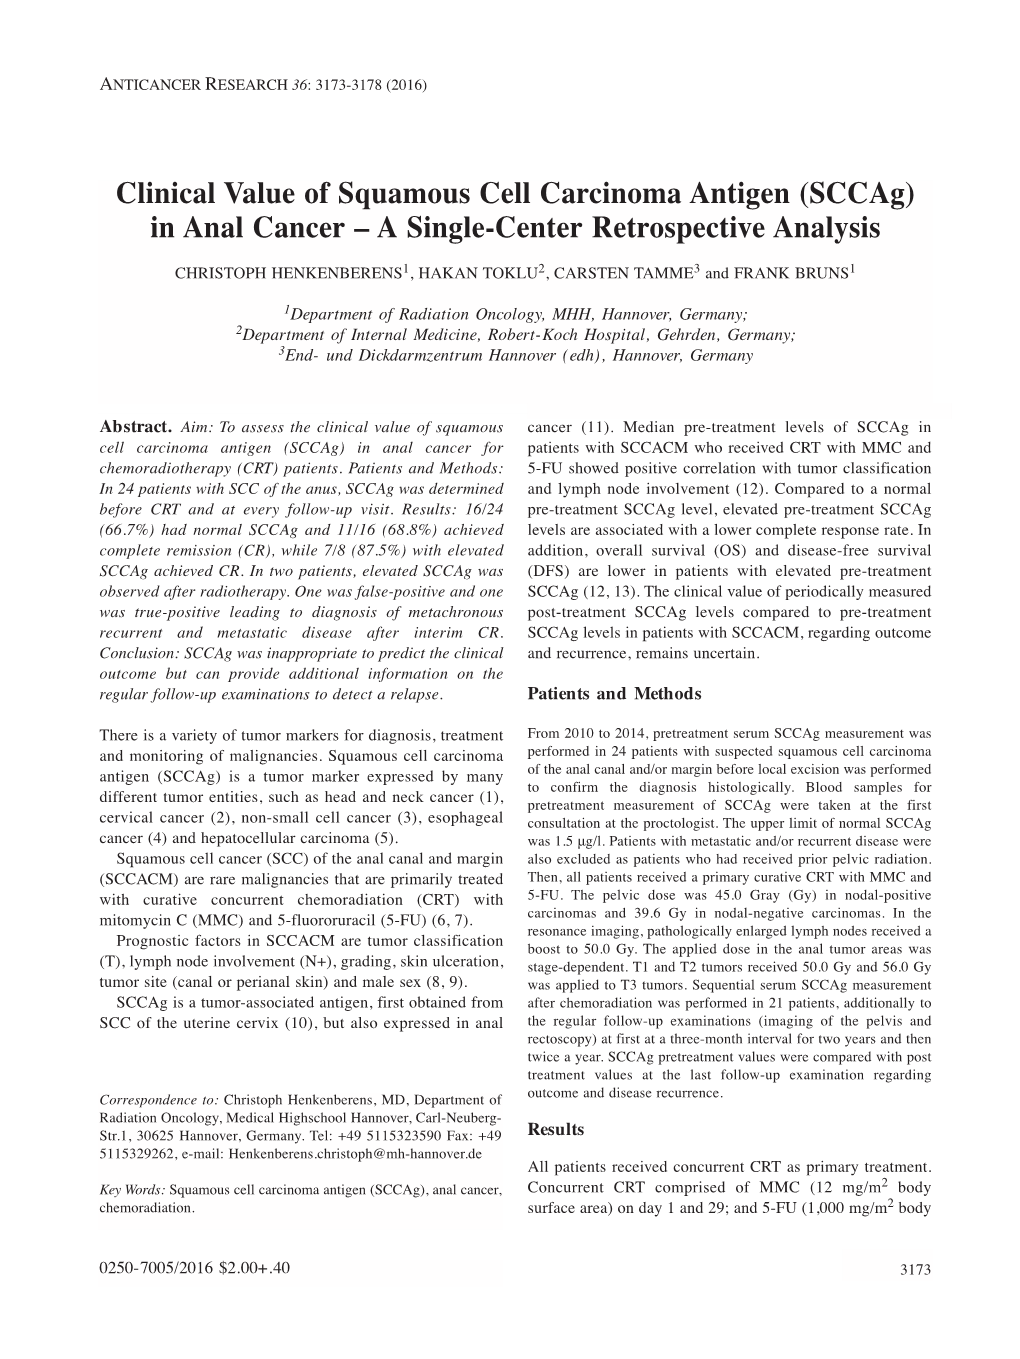 Clinical Value of Squamous Cell Carcinoma Antigen (Sccag) in Anal Cancer – a Single-Center Retrospective Analysis